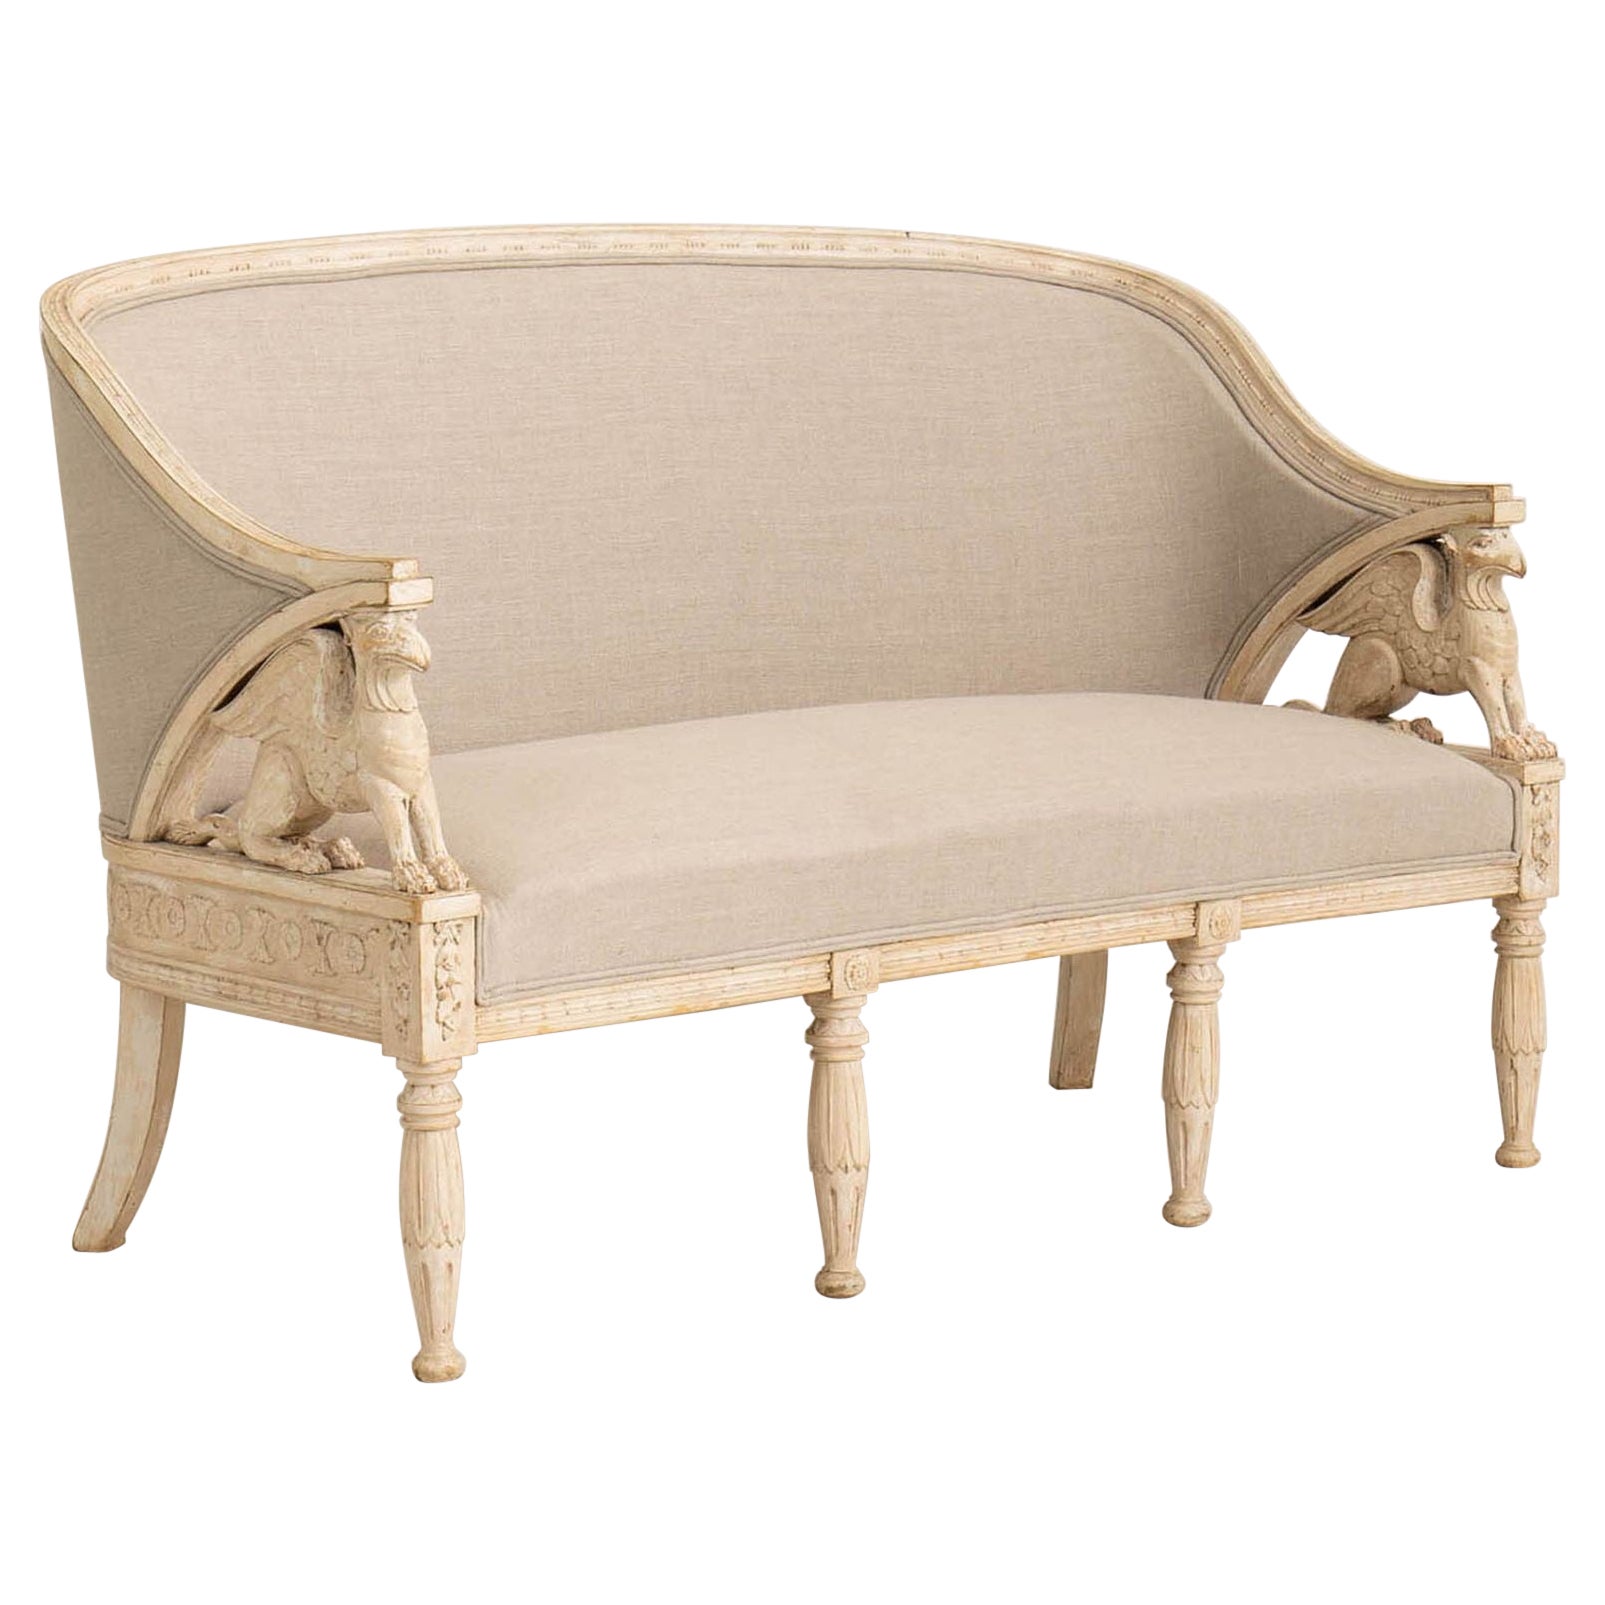 Swedish Gustavian Style Sofa with Griffin Carvings in Original Paint